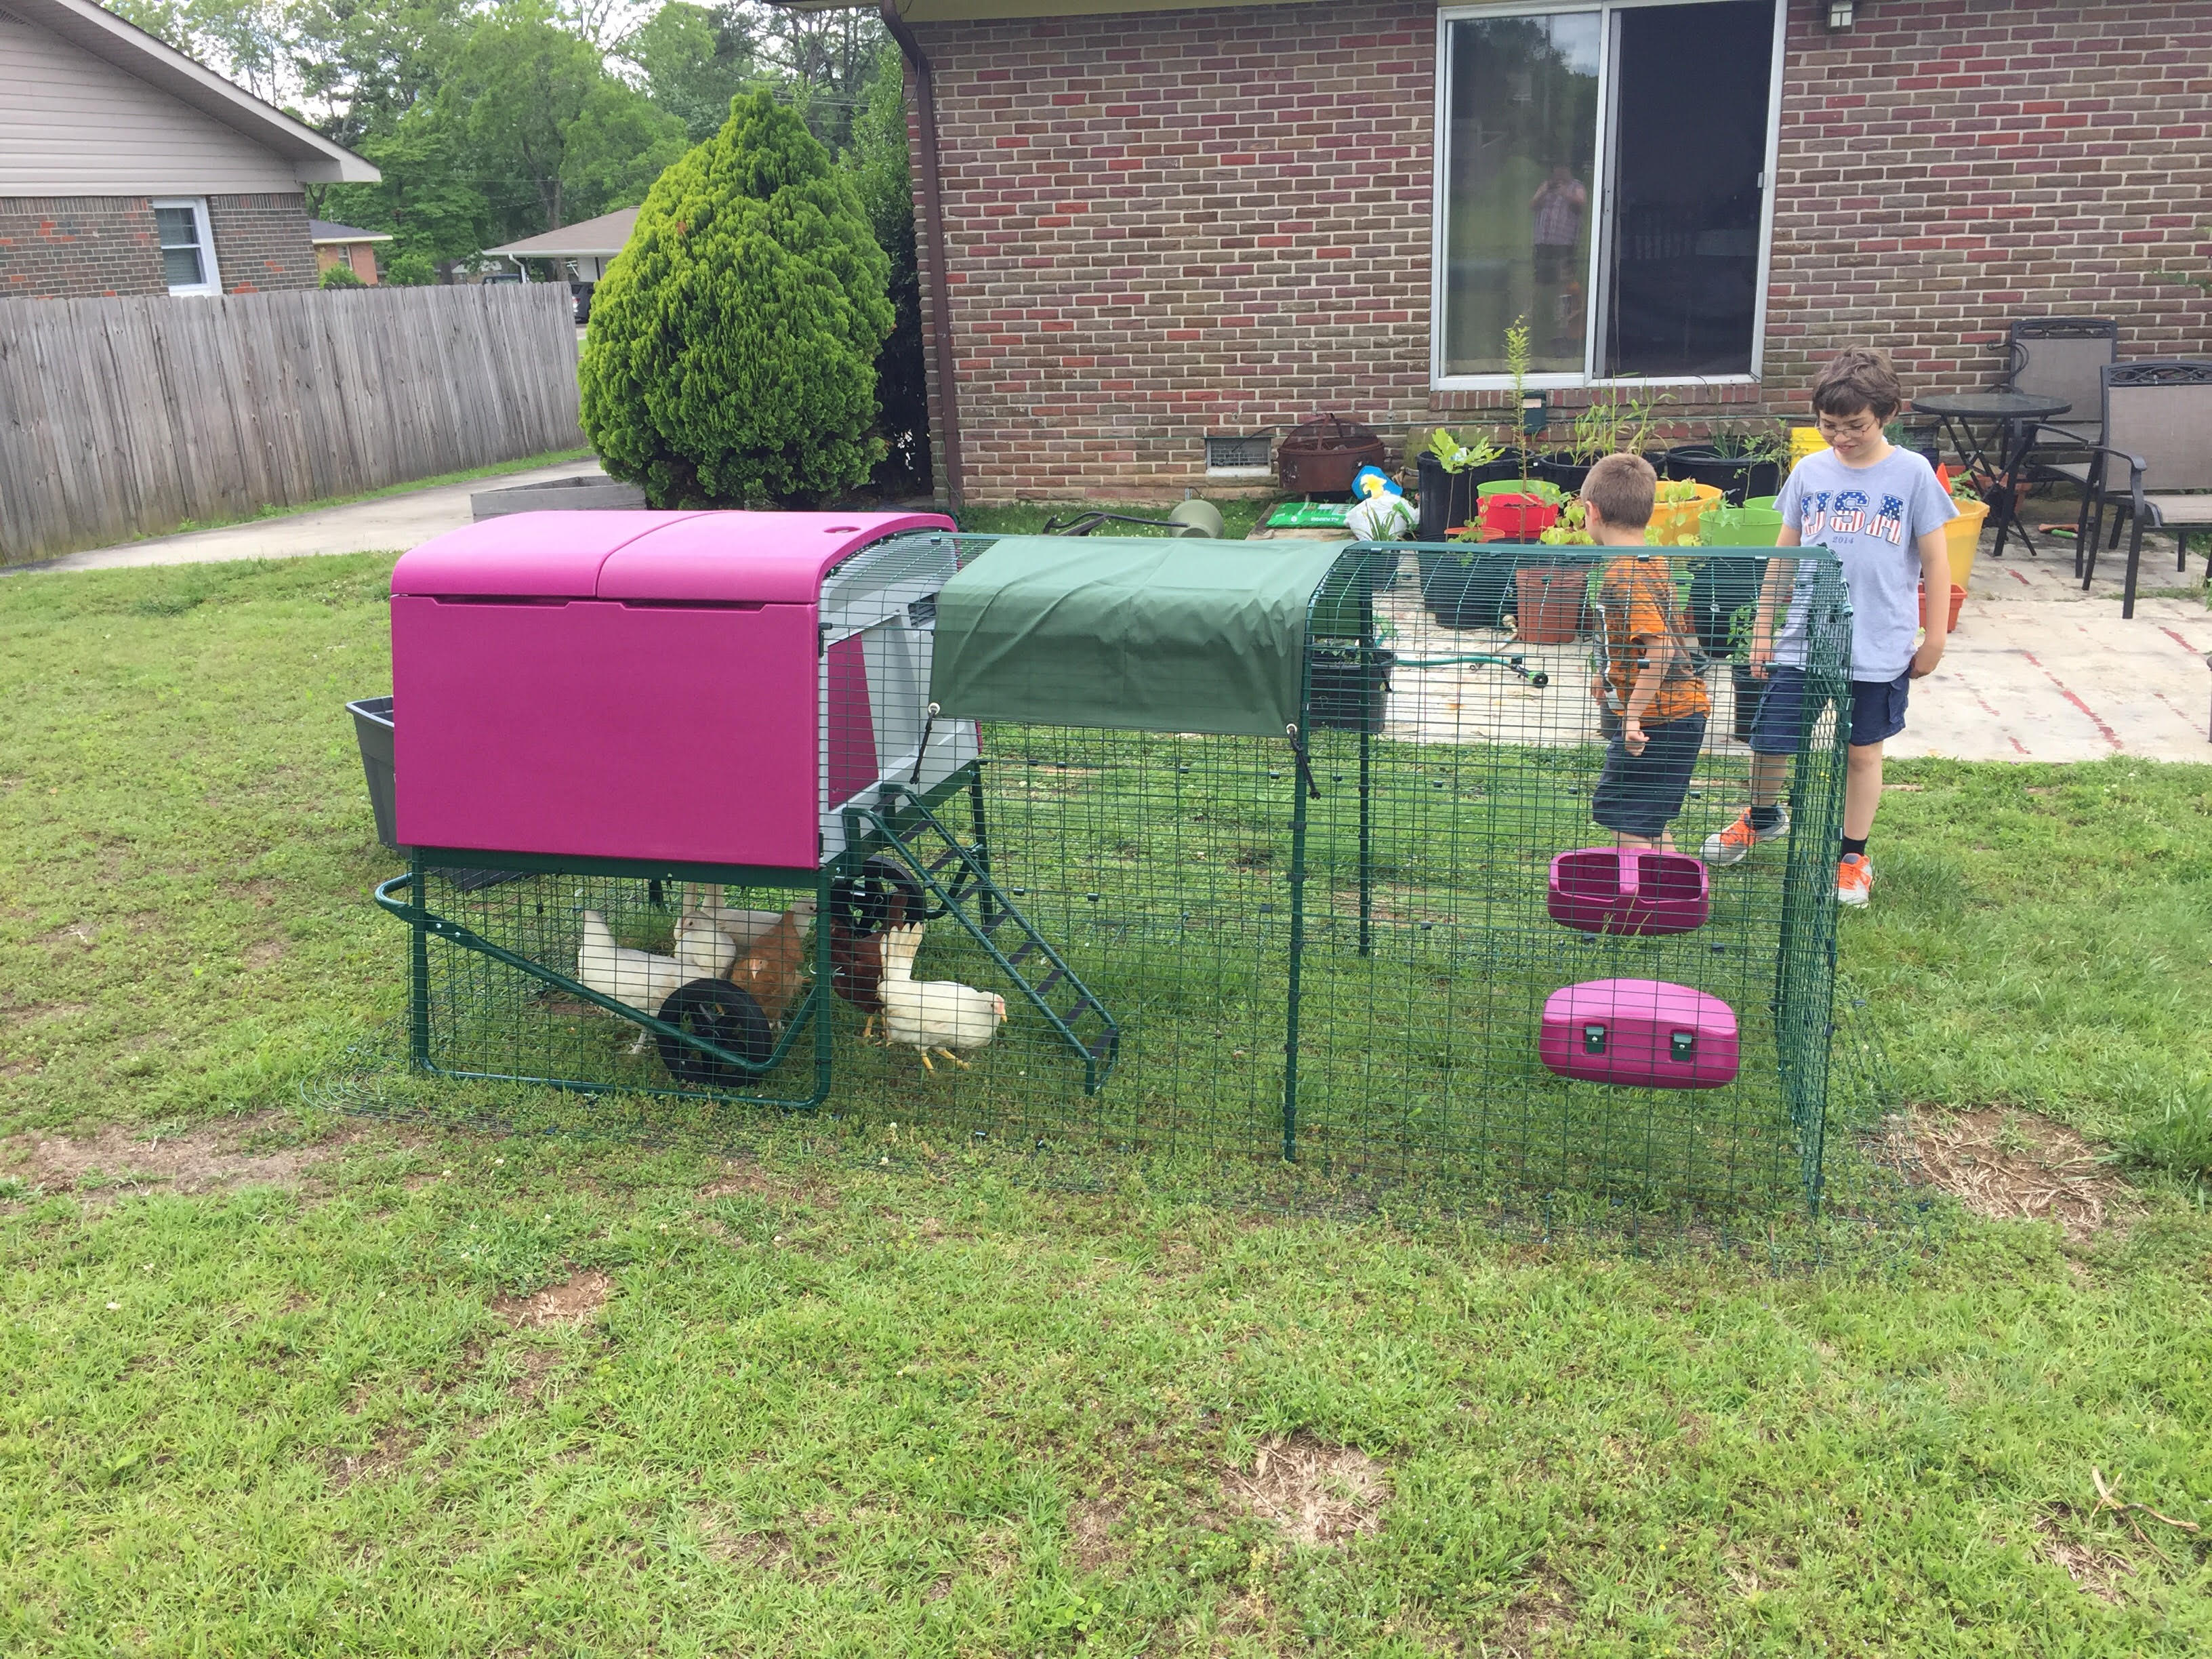 Cube with kiddos and Hens